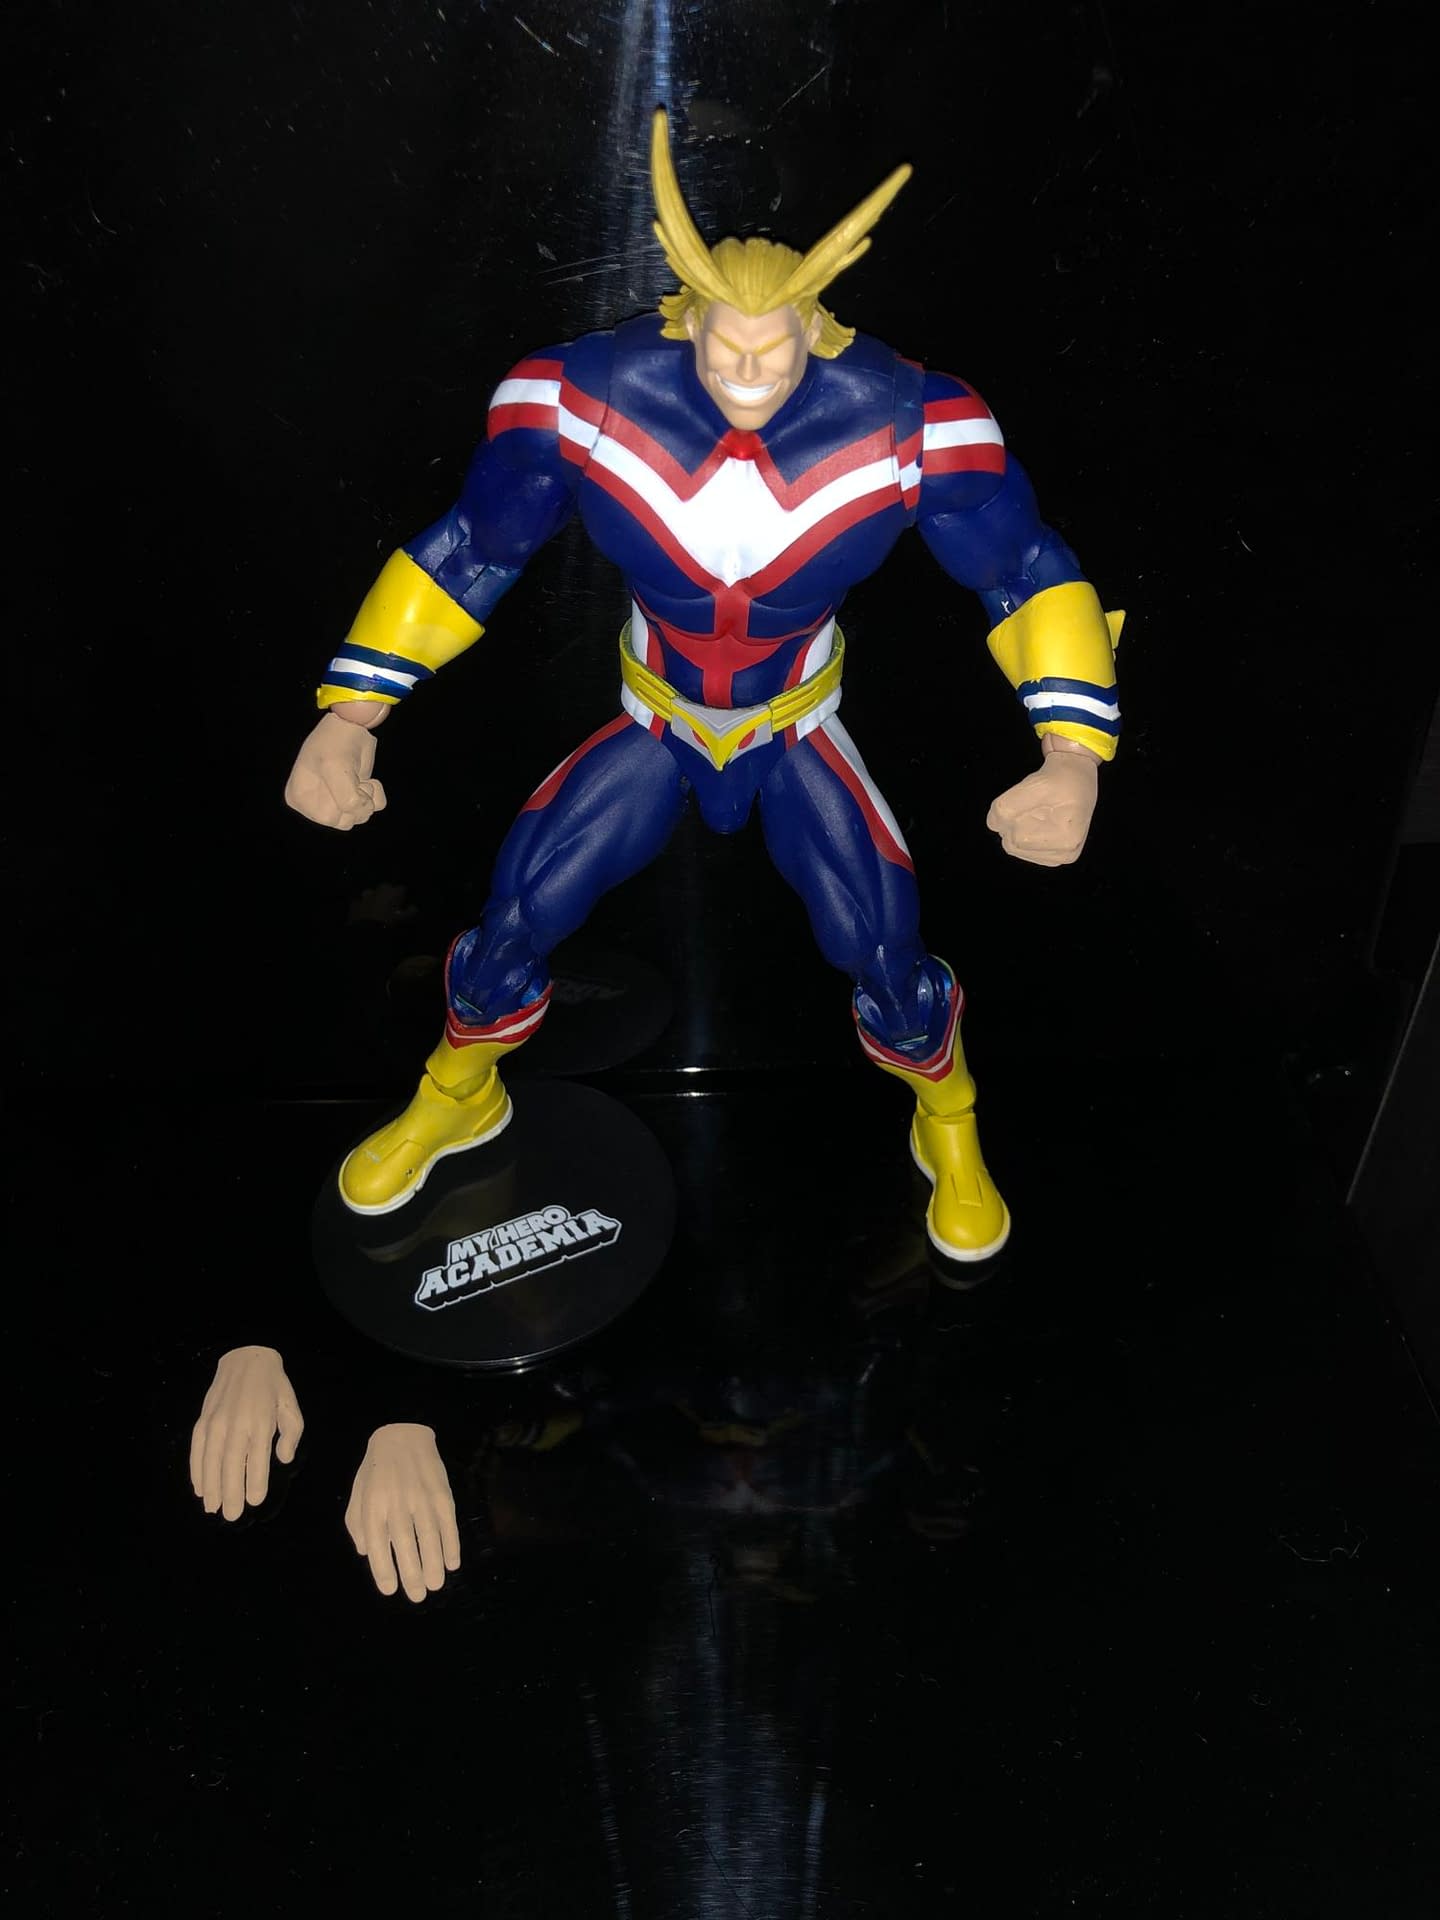 My Hero Academia McFarlane Toys Toy of the Year Nominee [Review]